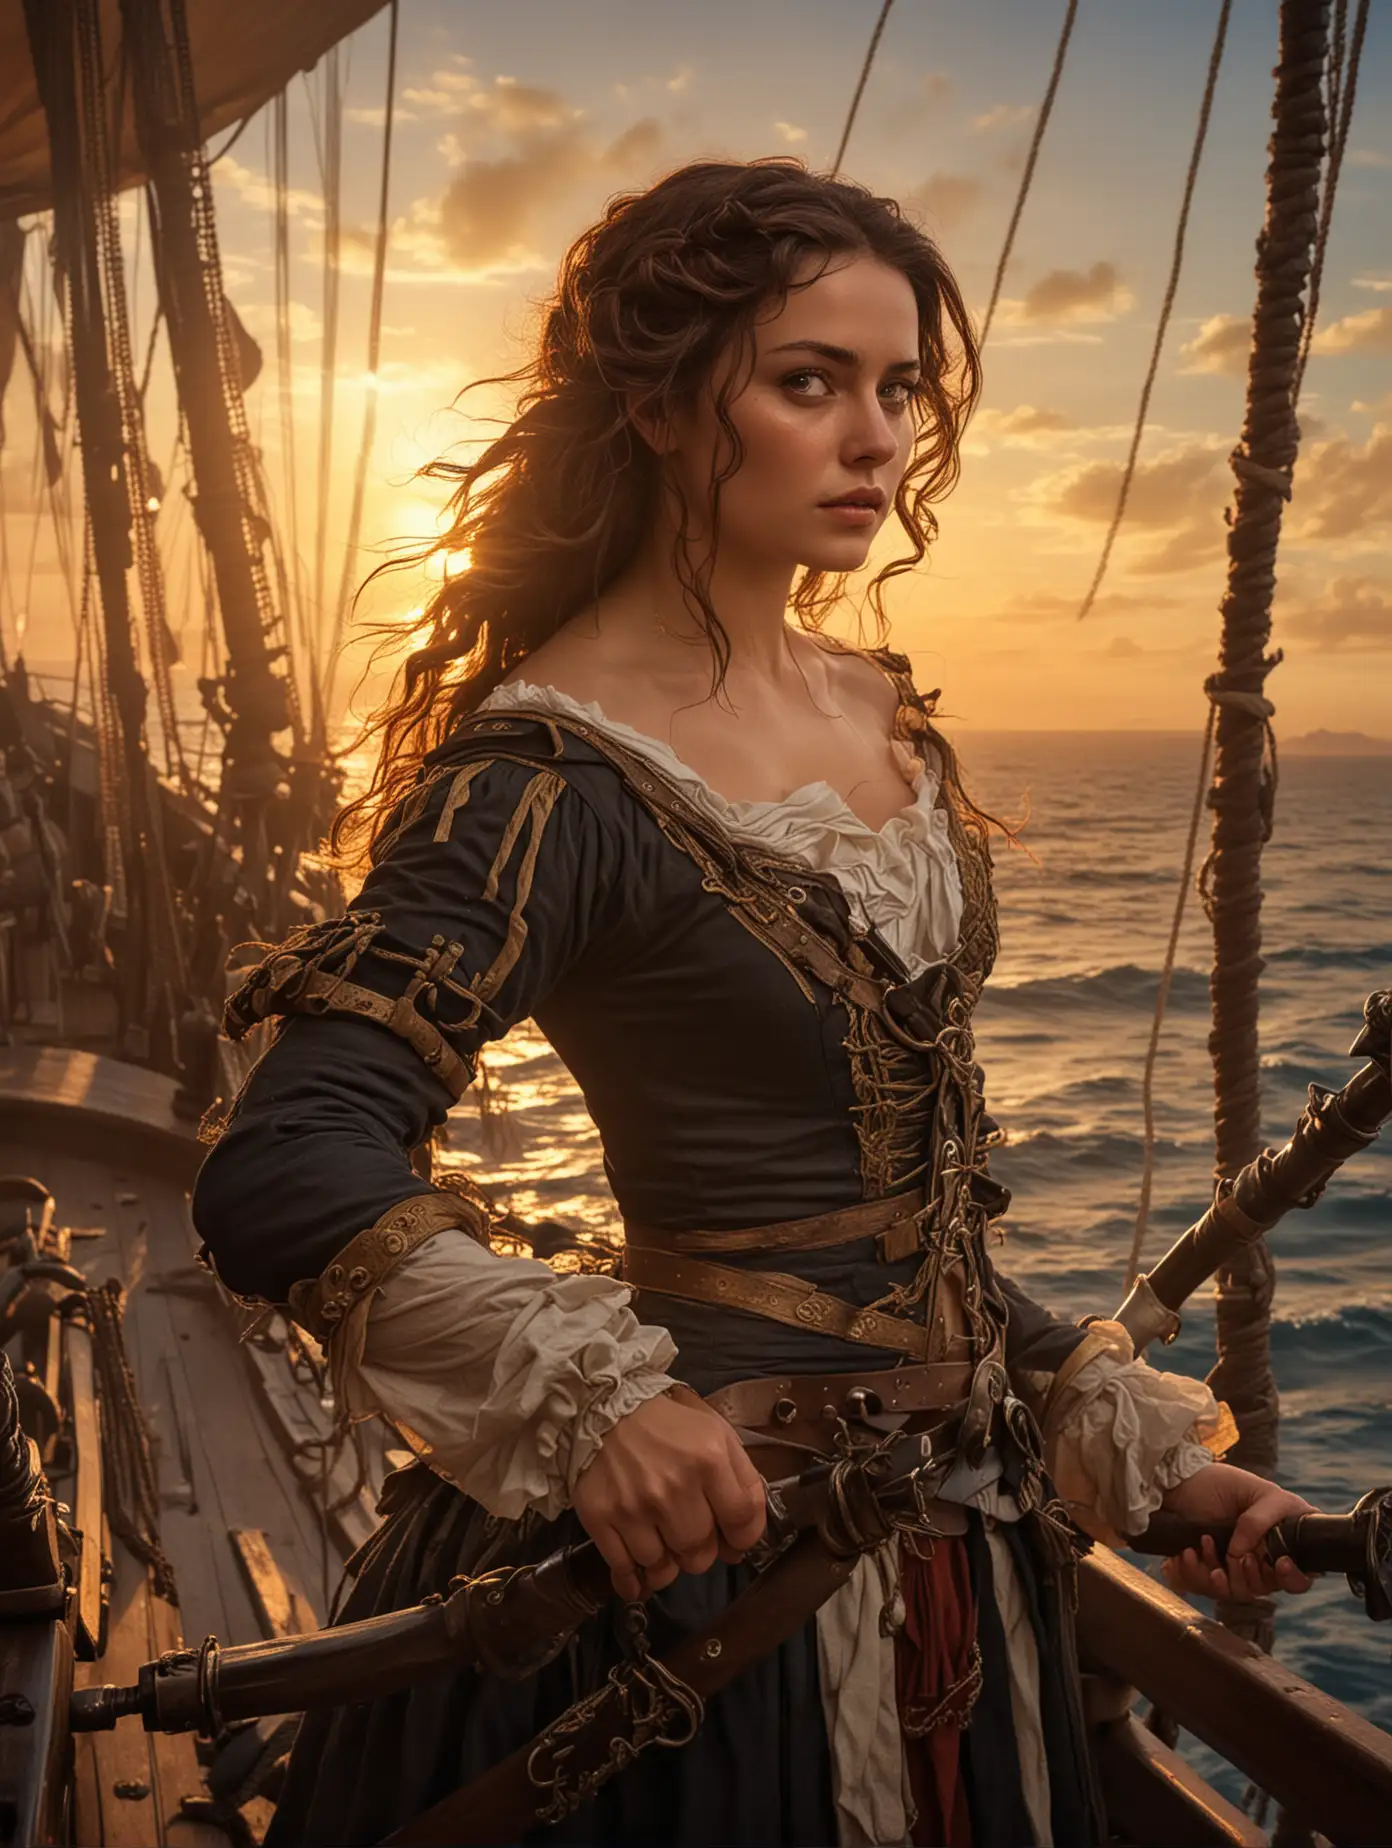 Epic-17th-Century-Warrior-Woman-with-Pirate-Sabers-on-Ship-Deck-at-Sunset